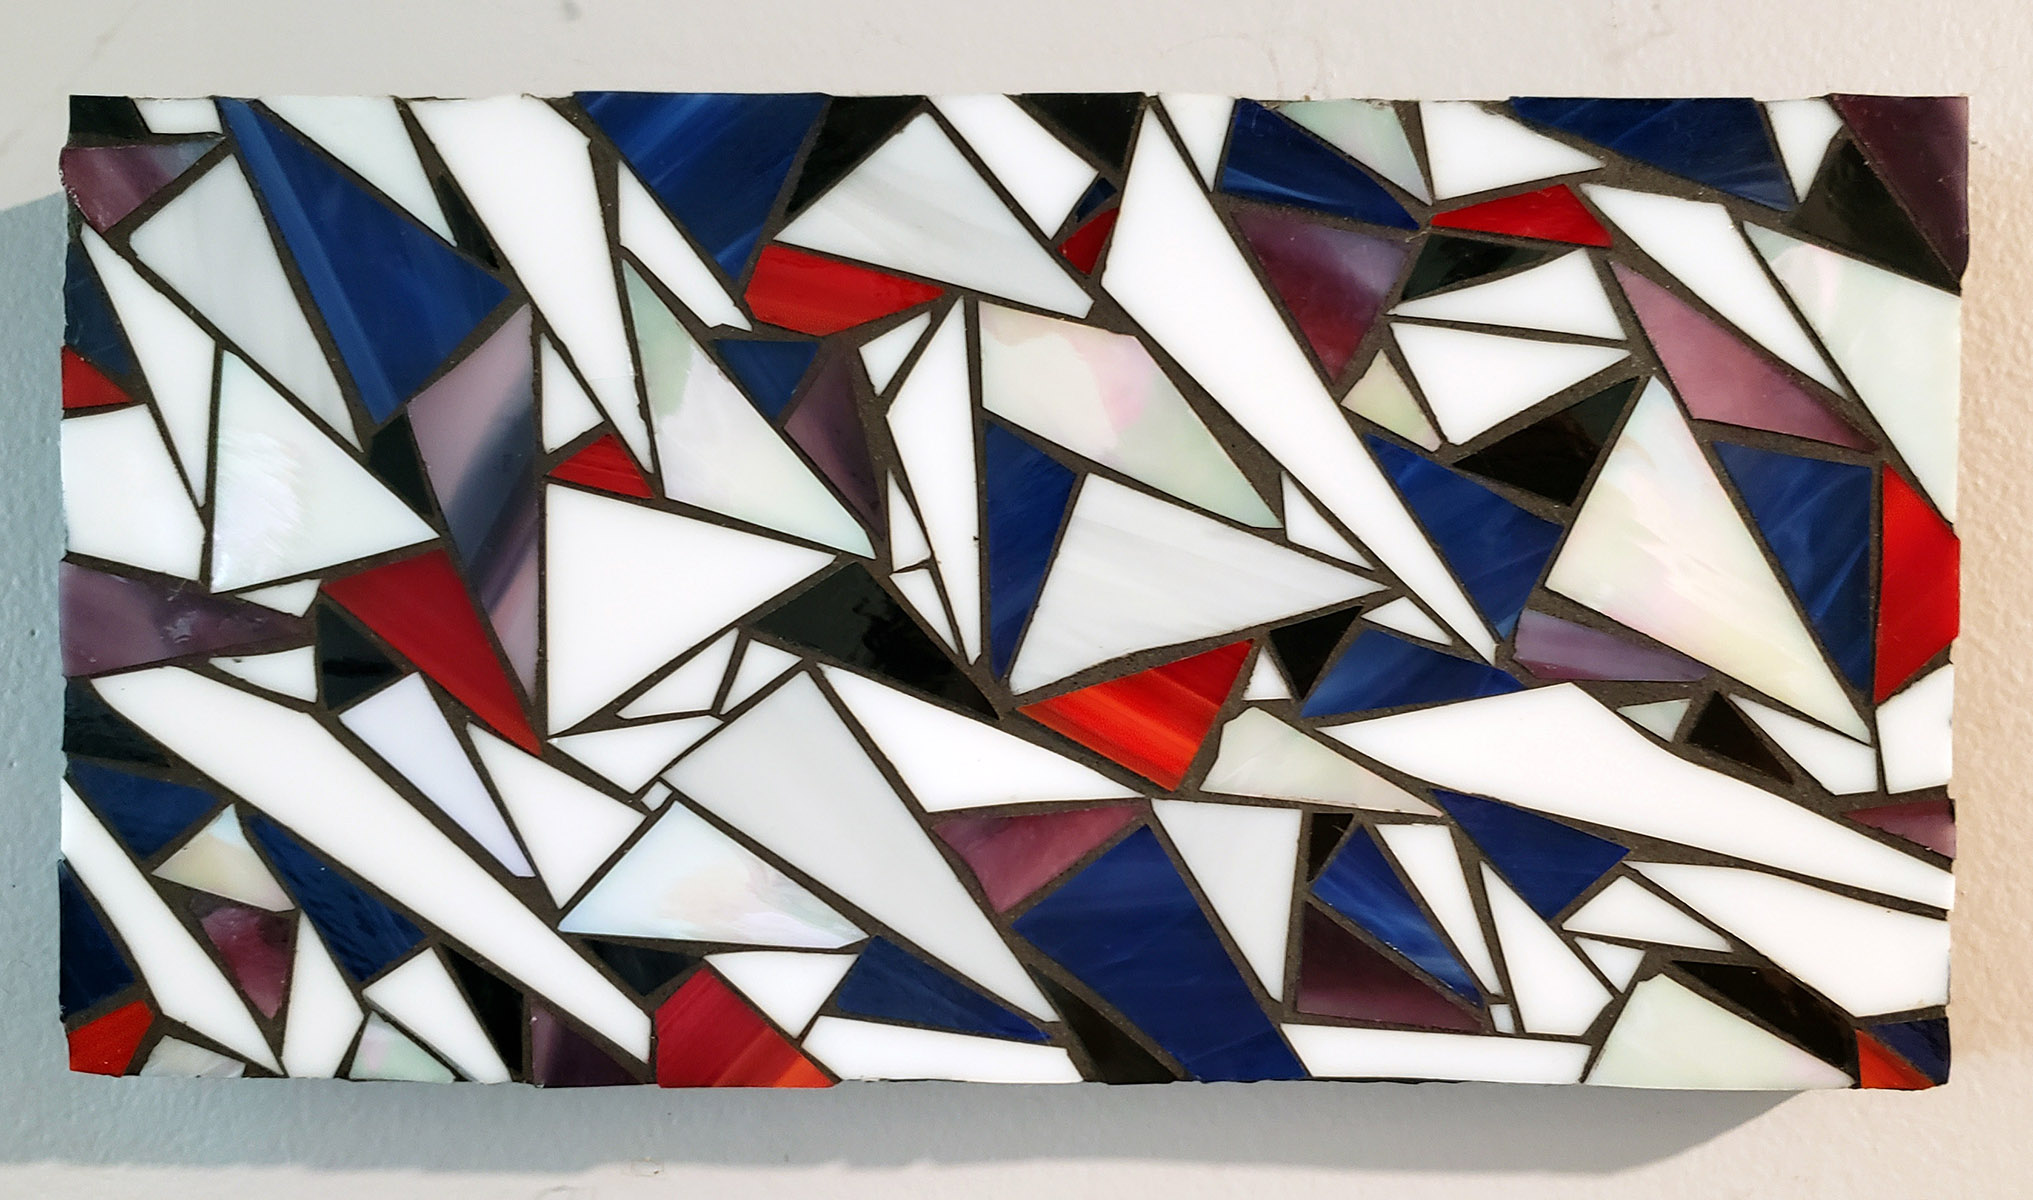 Value Contrast in Abstract Mosaic Artwork